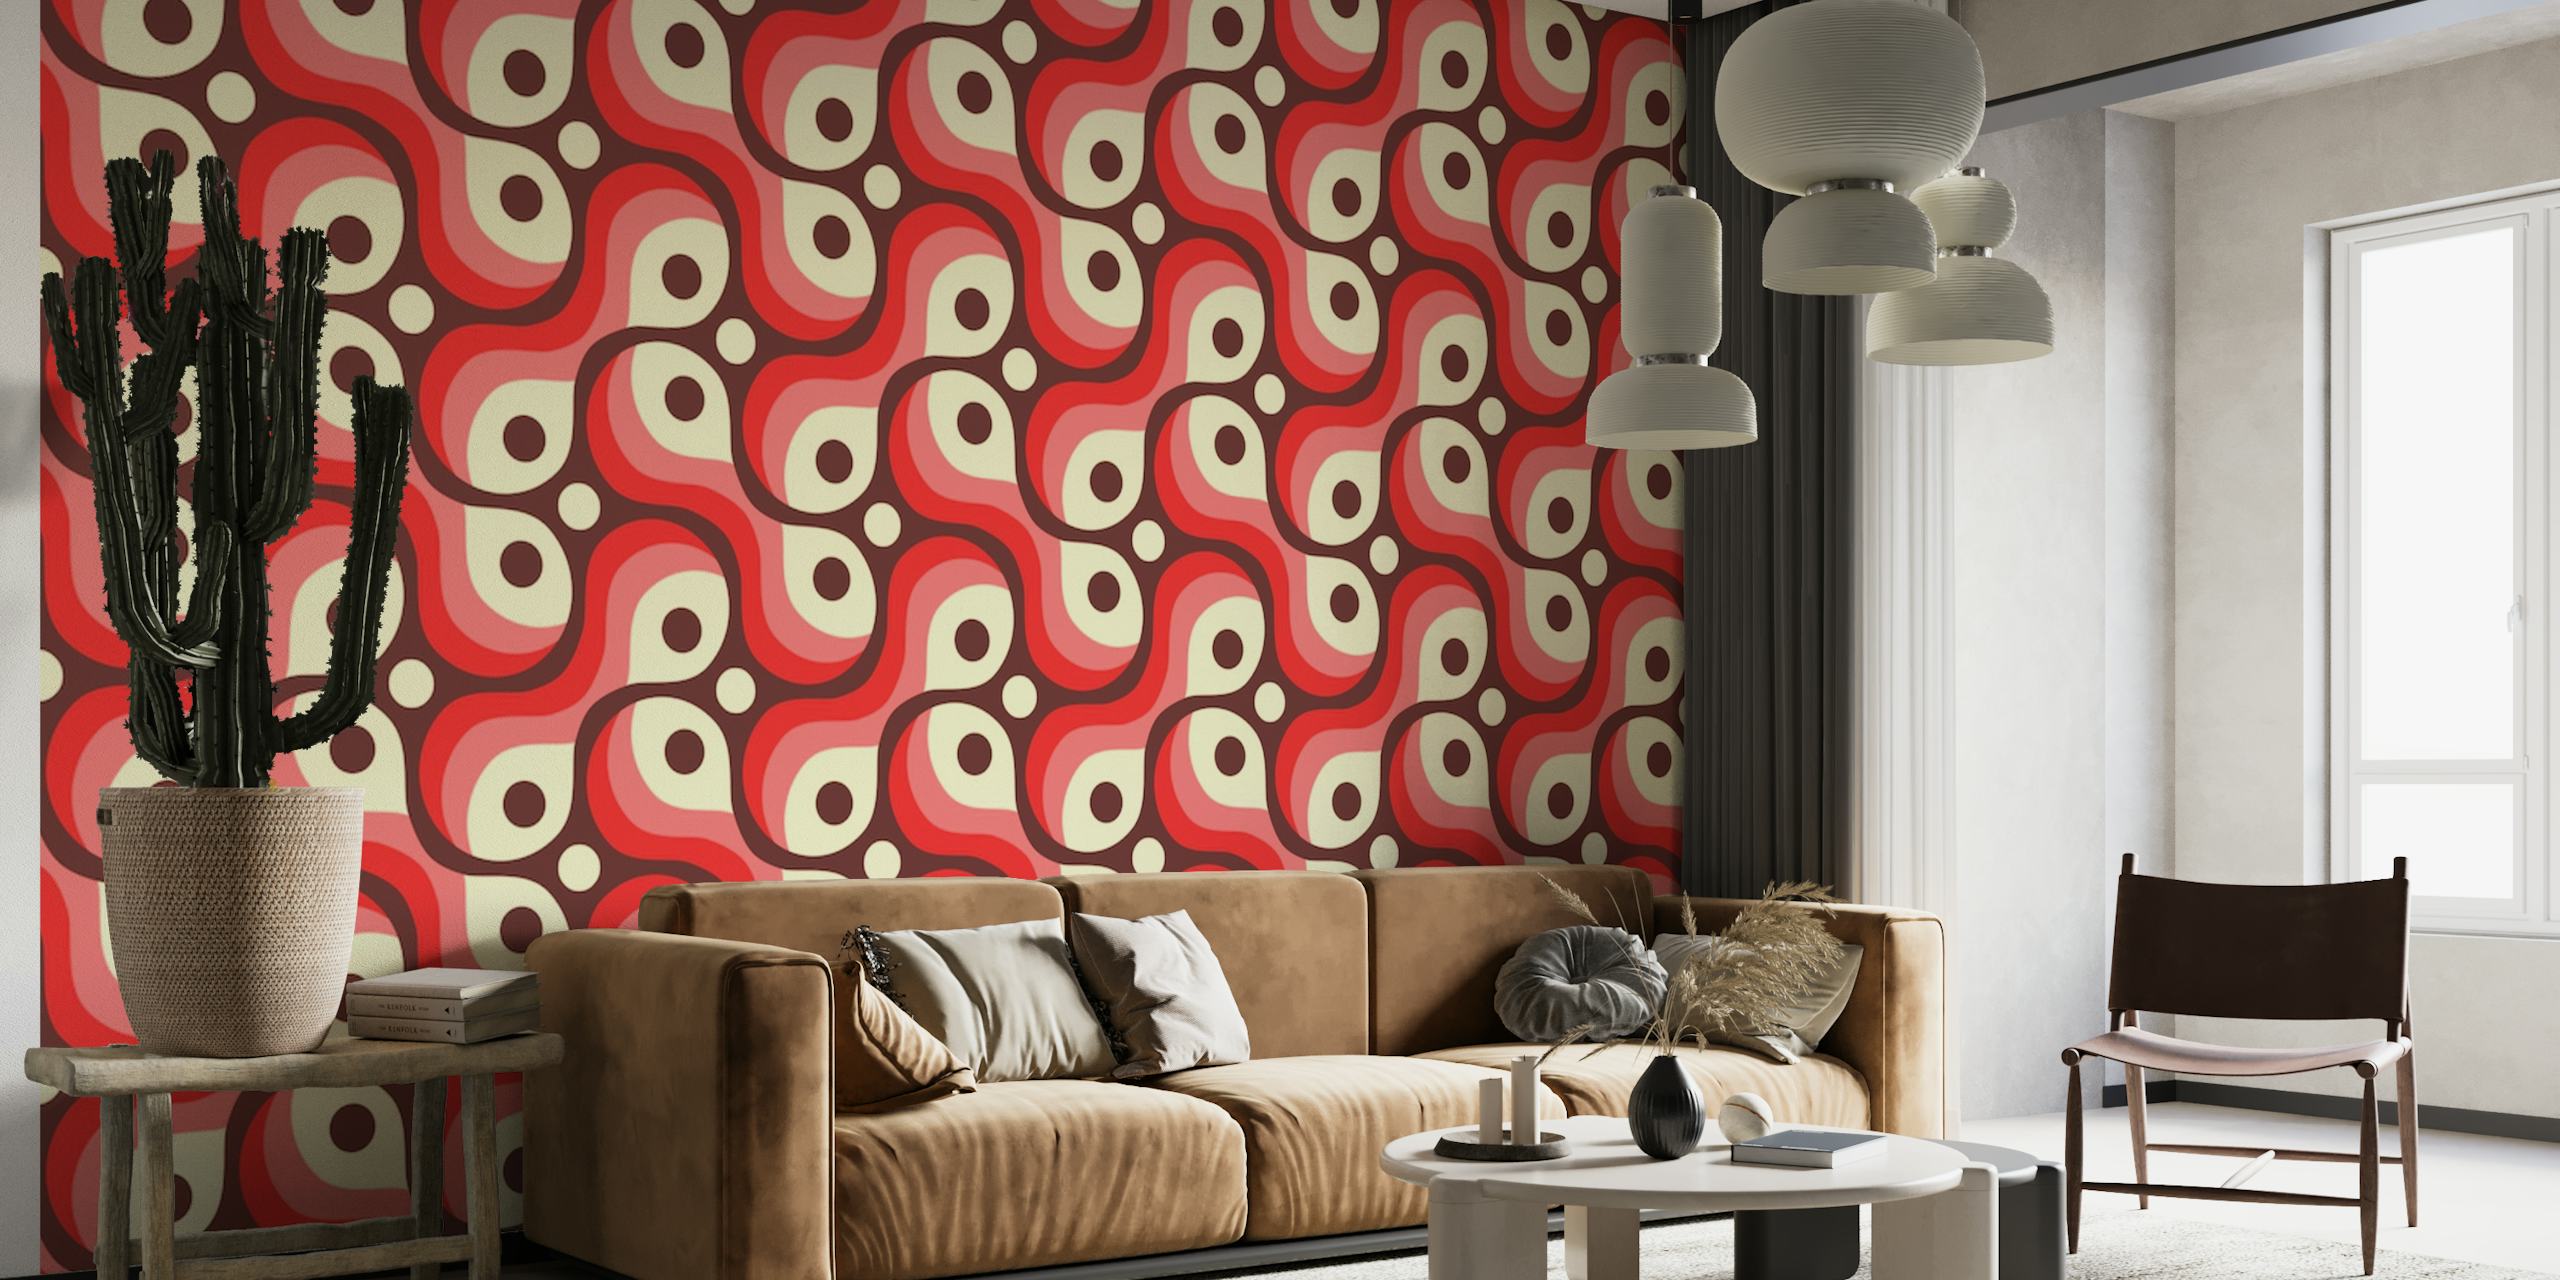 2203 Abstract retro pattern behang